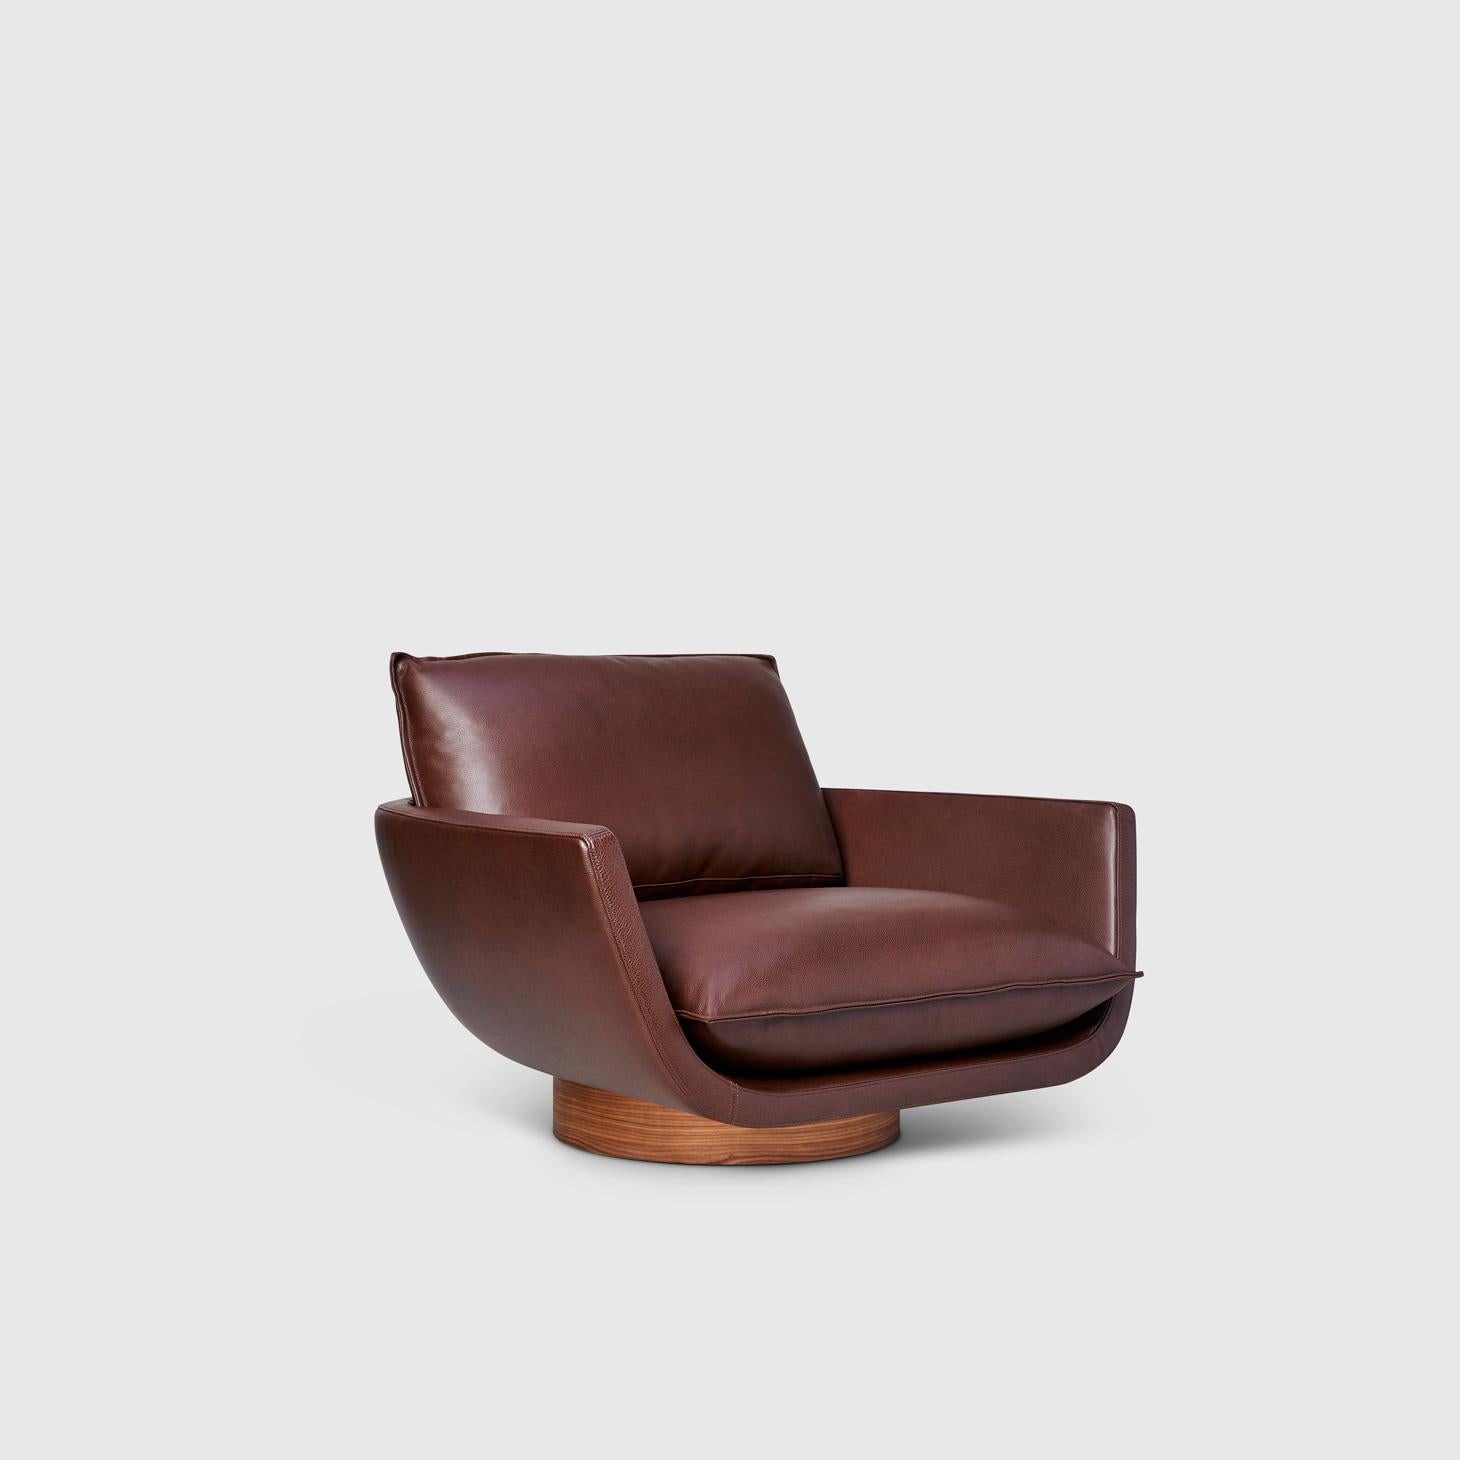 This Rua Ipanema lounge chair by Yabu Pushelberg is in Rusic Nappa Leather with an extra height base. 

Crafted in Italy, the Rua Ipanema lounge chair comes on a standard or extra-height swivel base in walnut veneer. The shell and down cushions